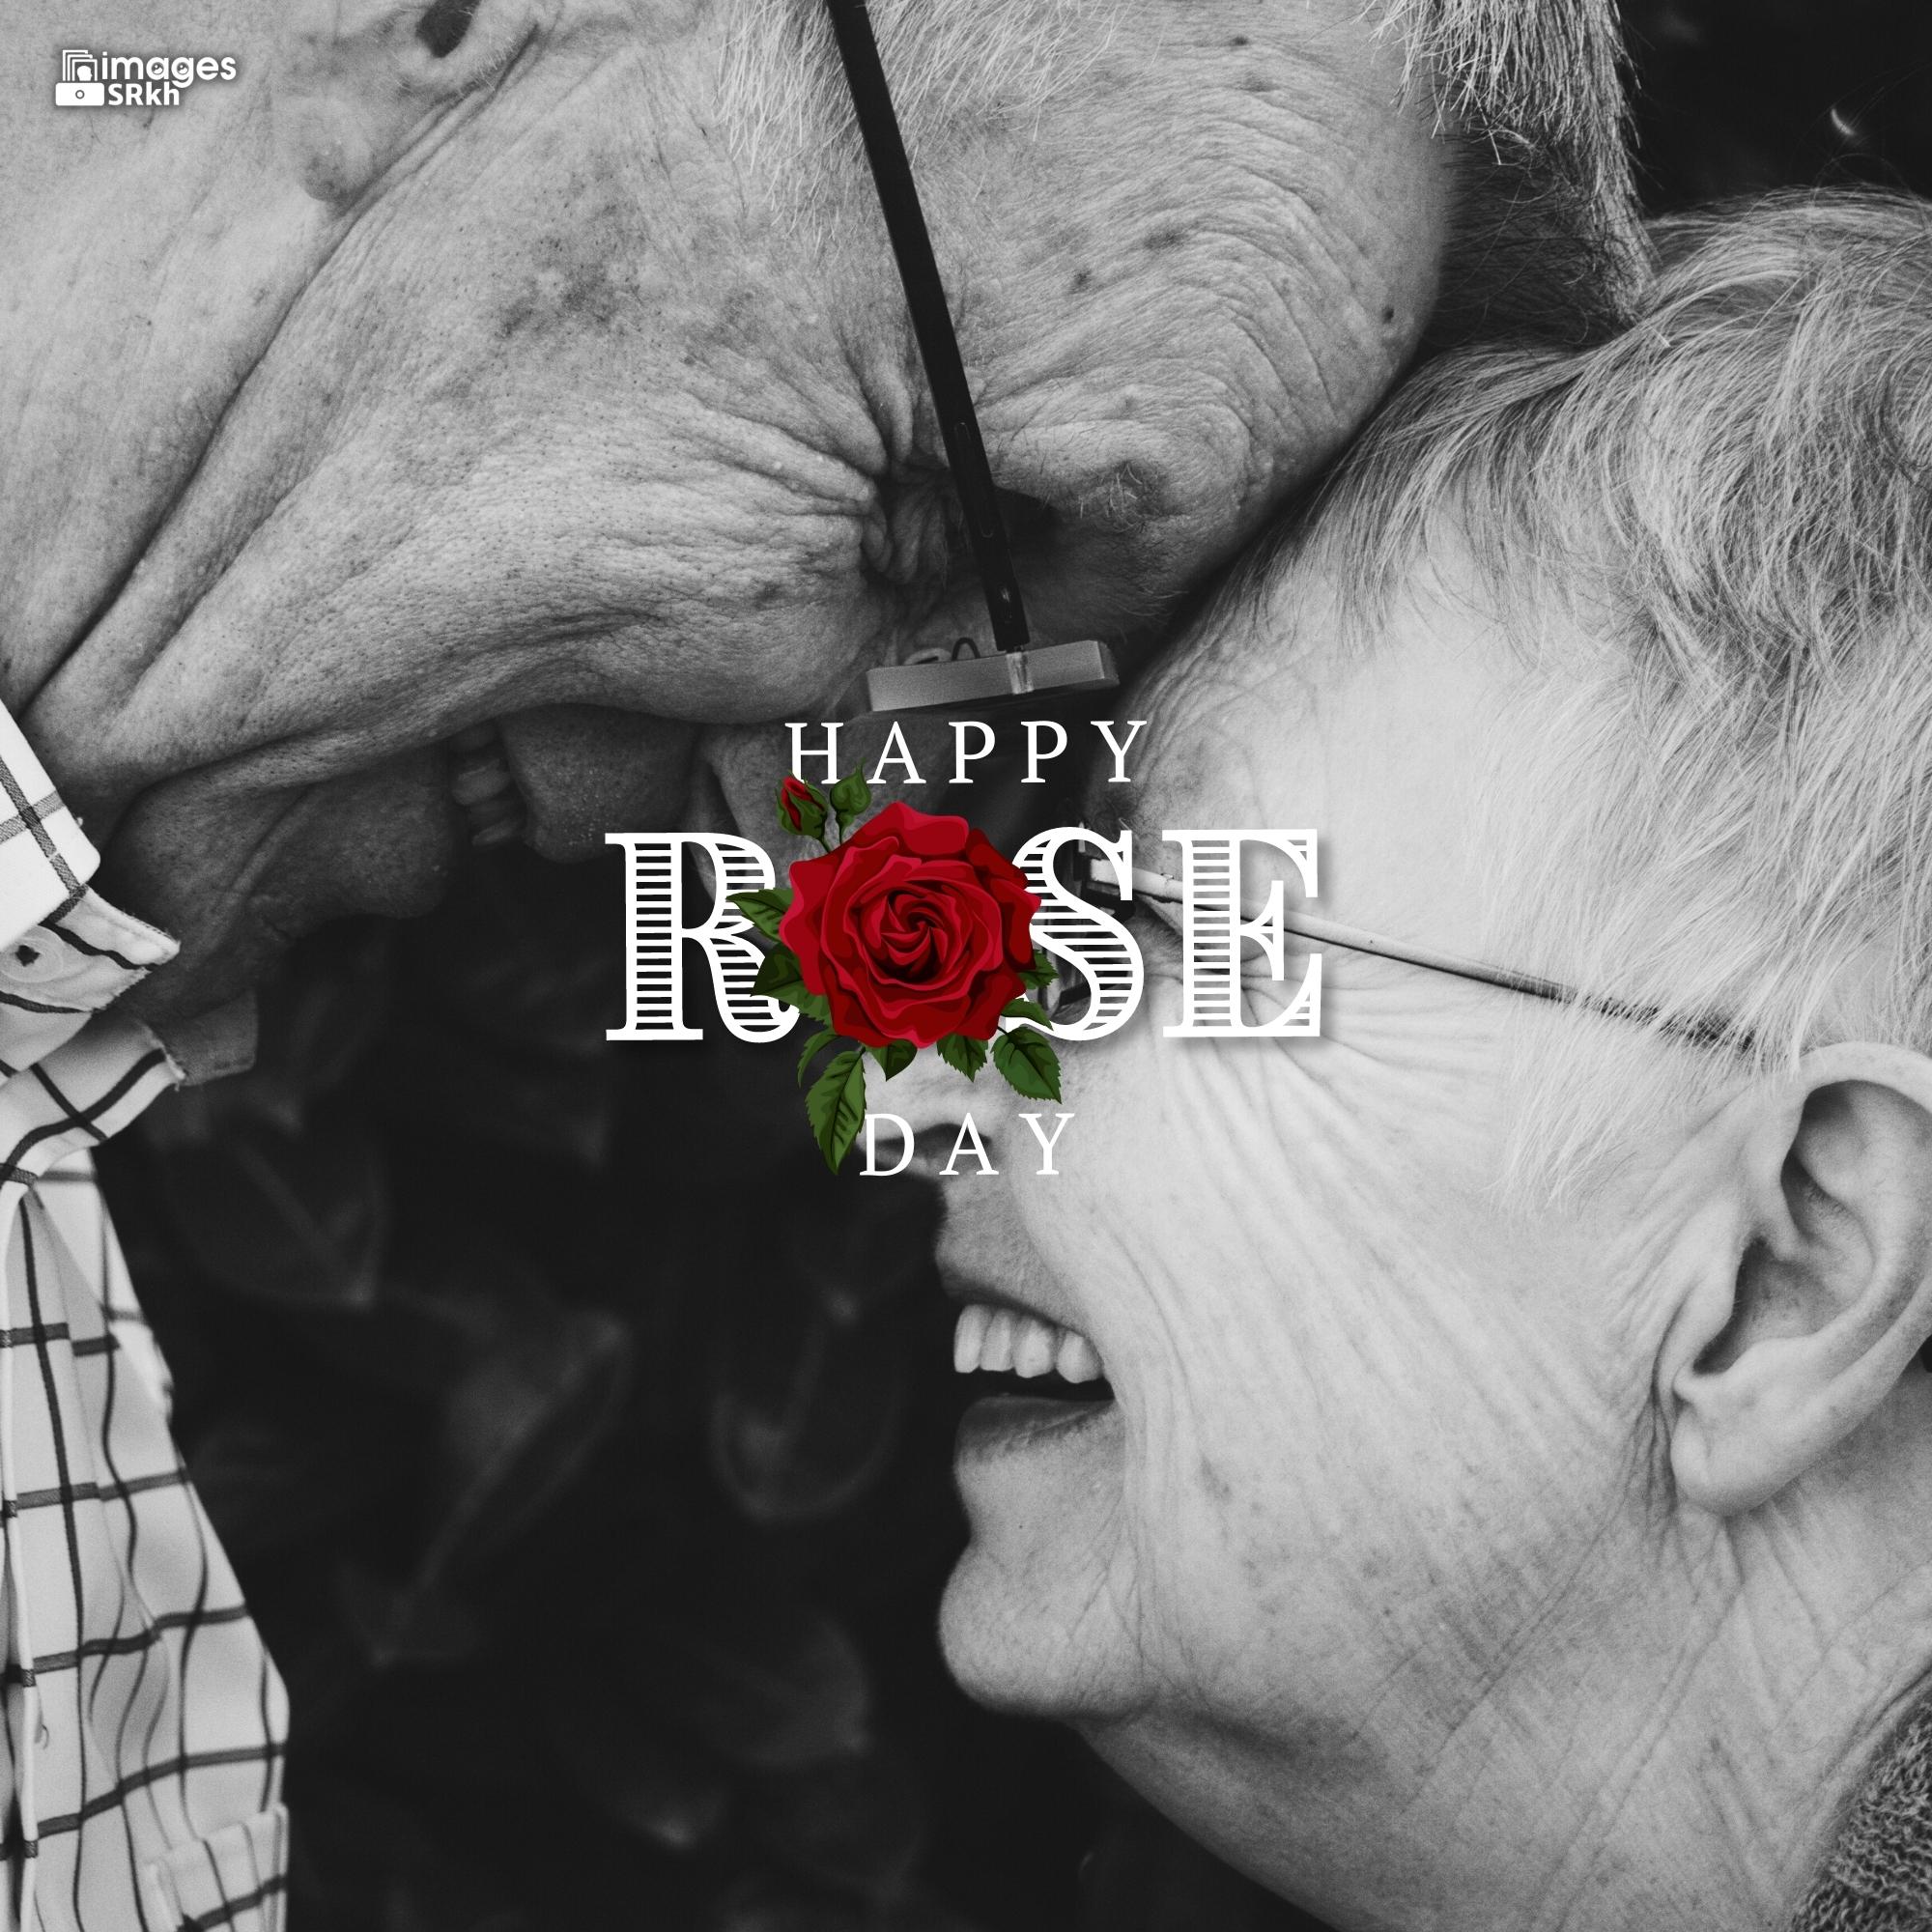 Romantic Rose Day Images Hd Download (11)